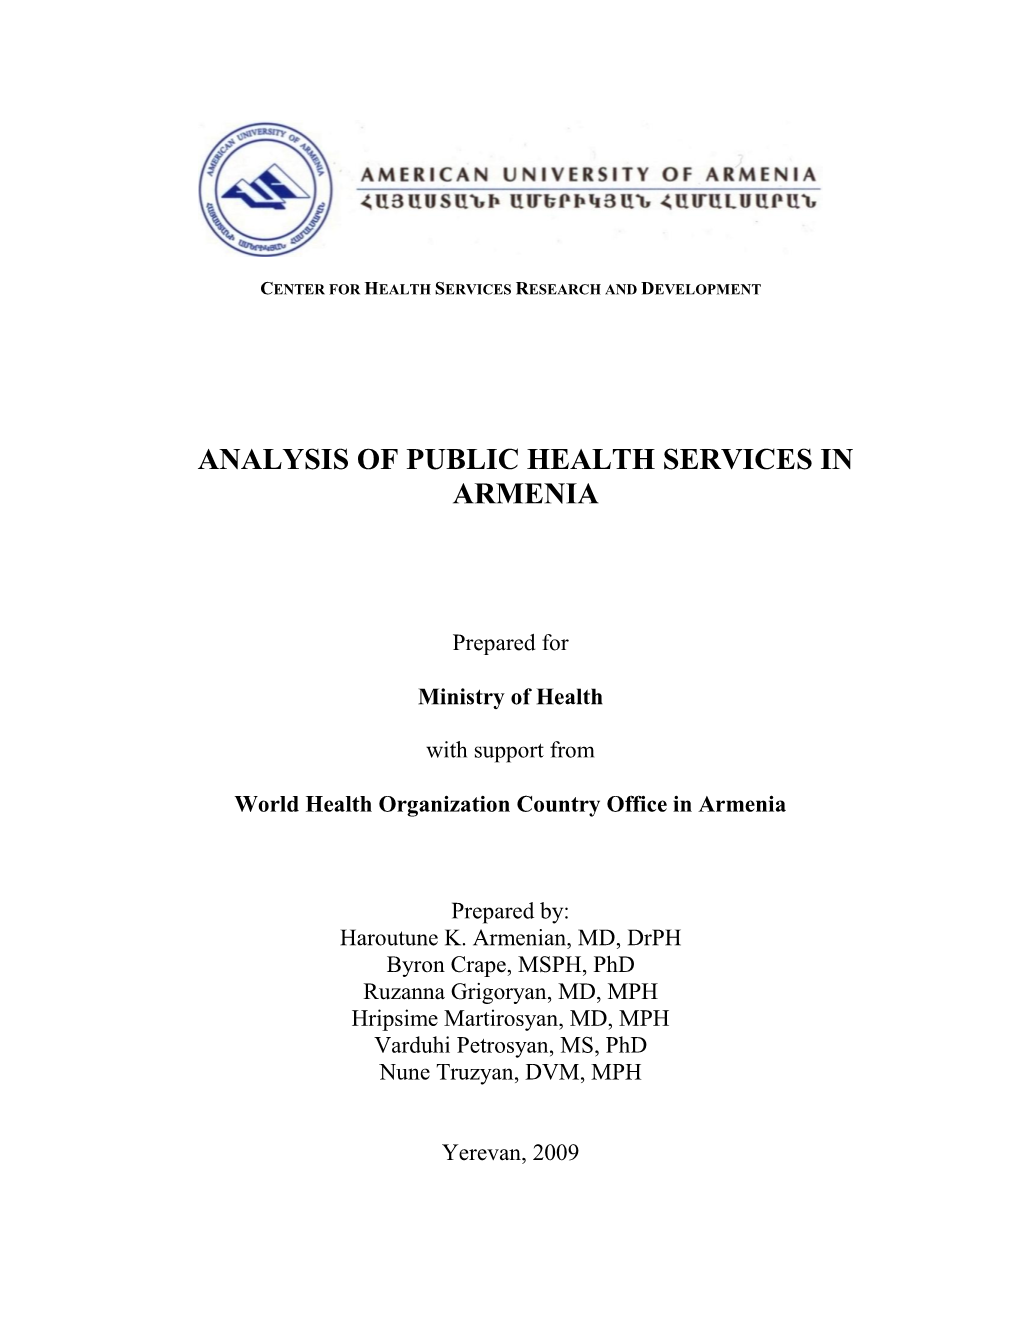 Analysis of Public Health Services in Armenia